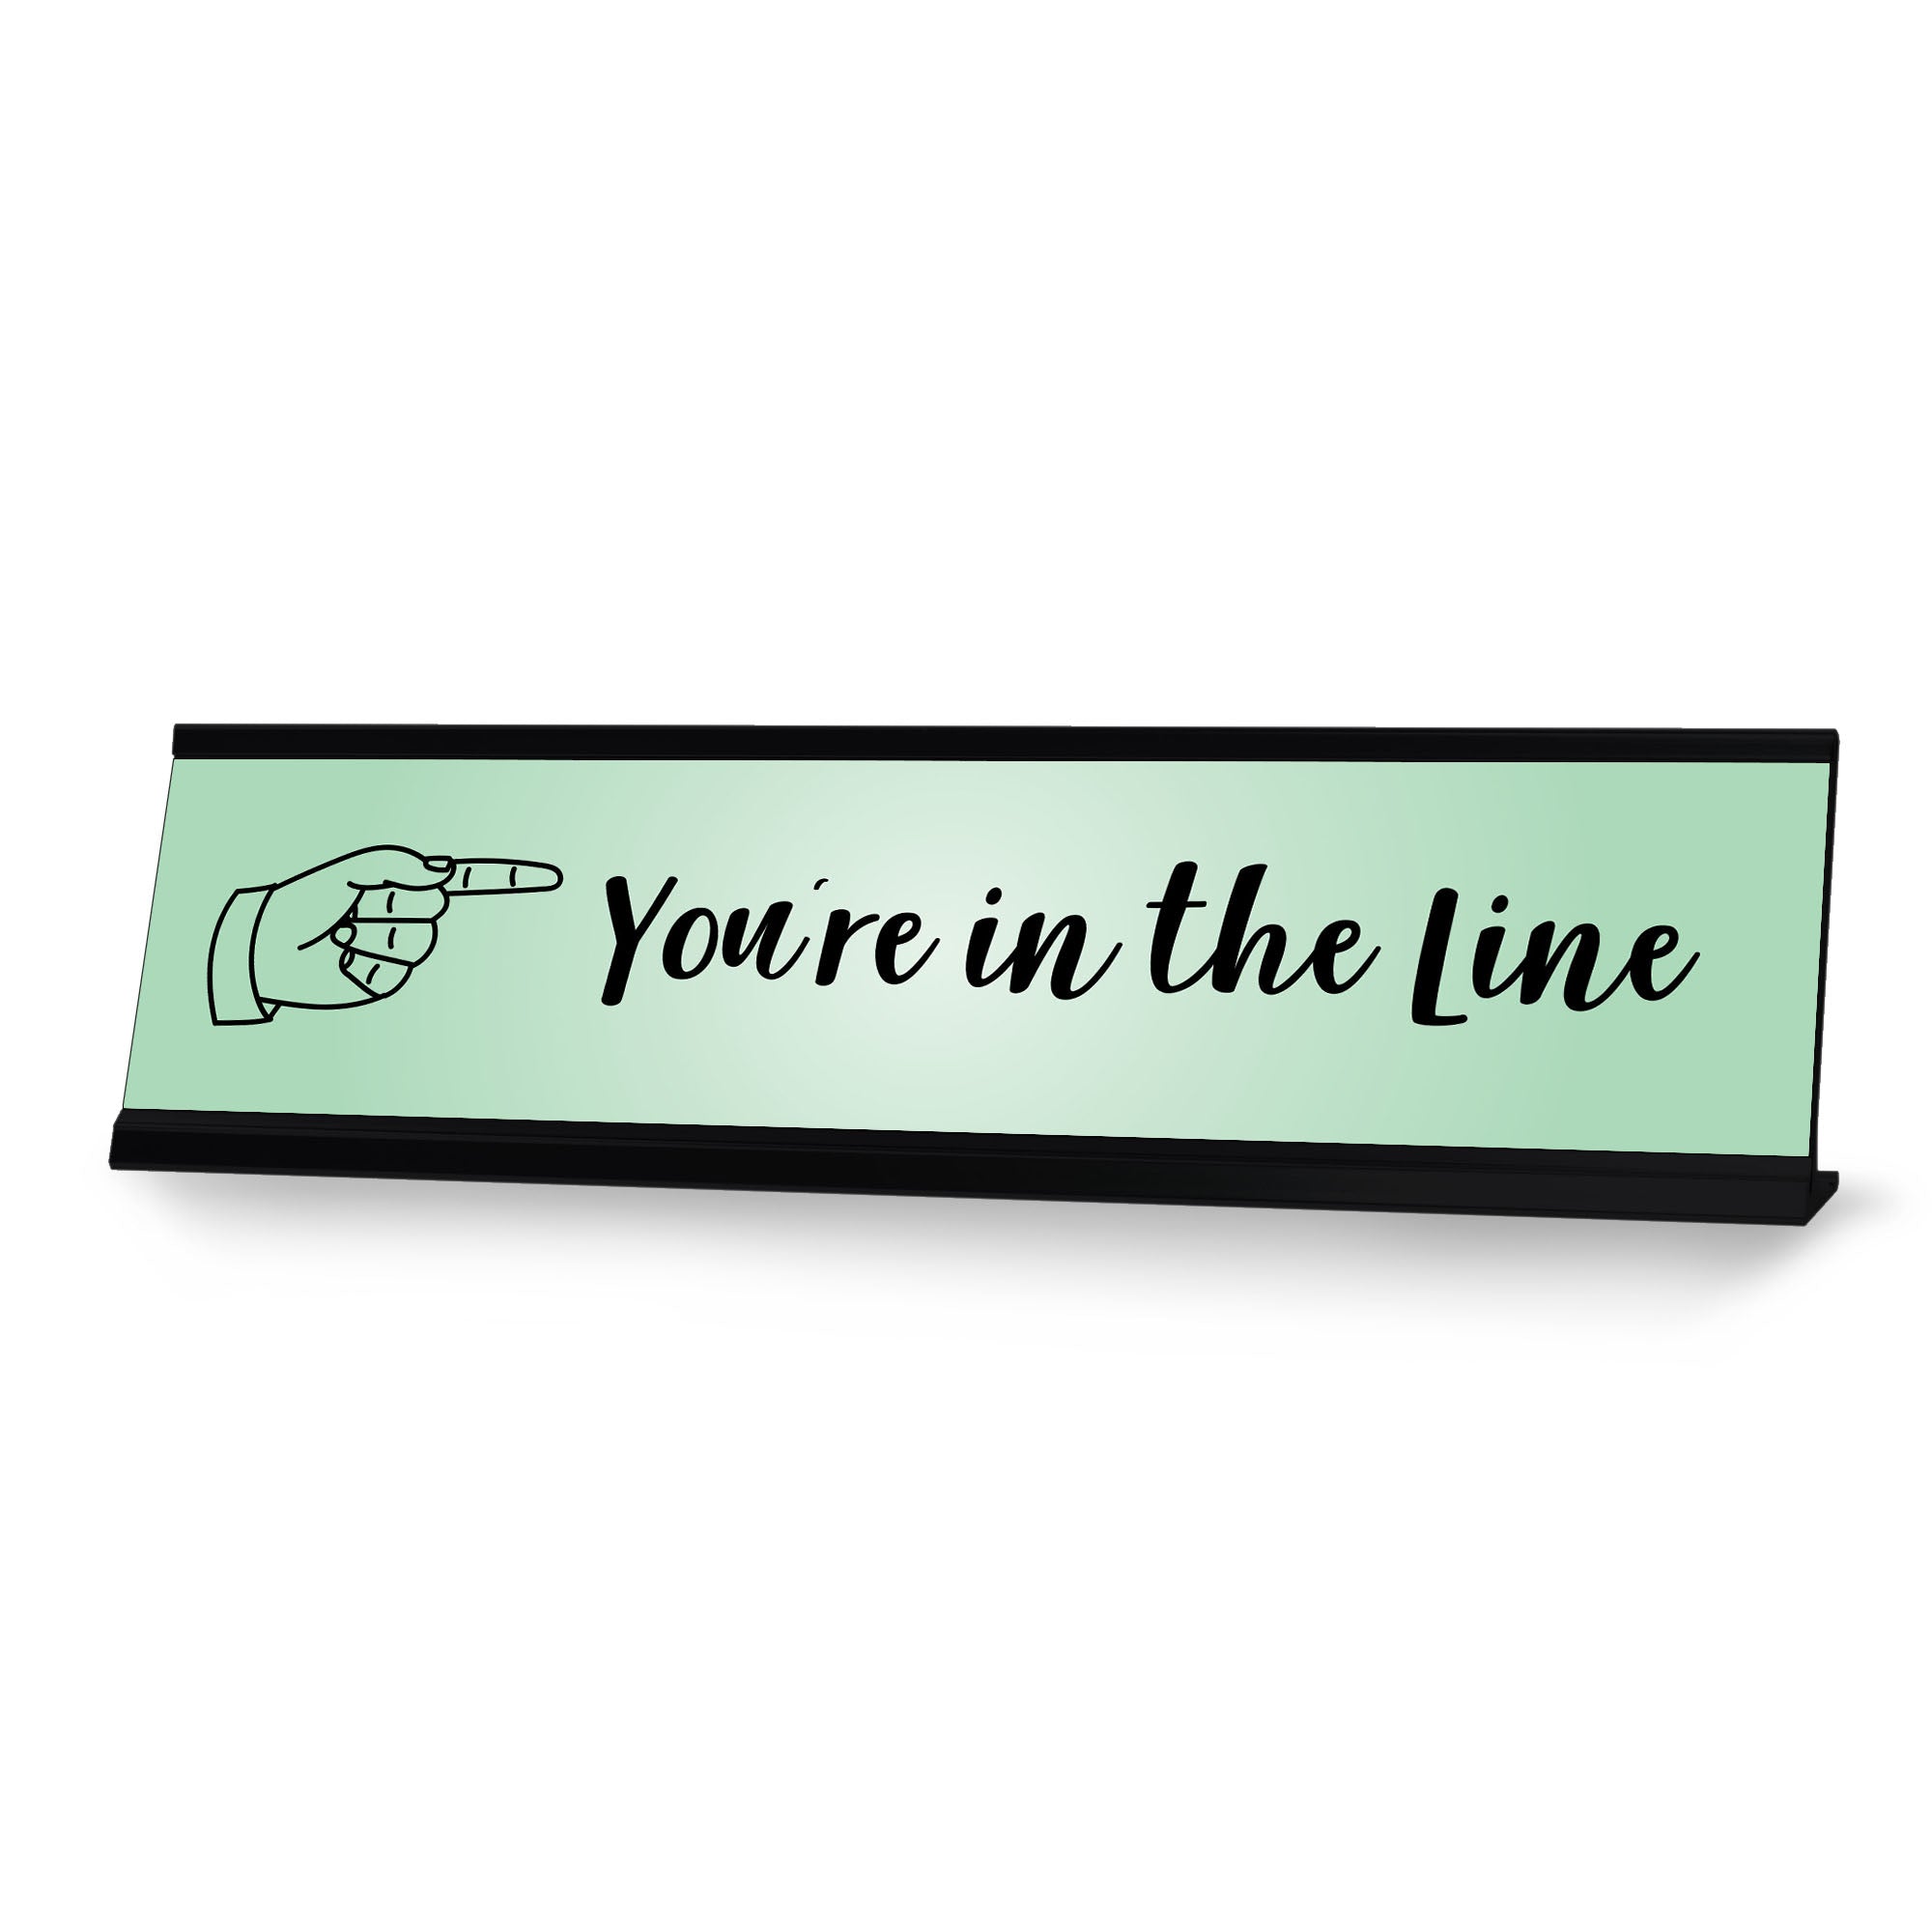 You're In the Line, Green Novelty Office Gift Desk Sign (2 x 8")